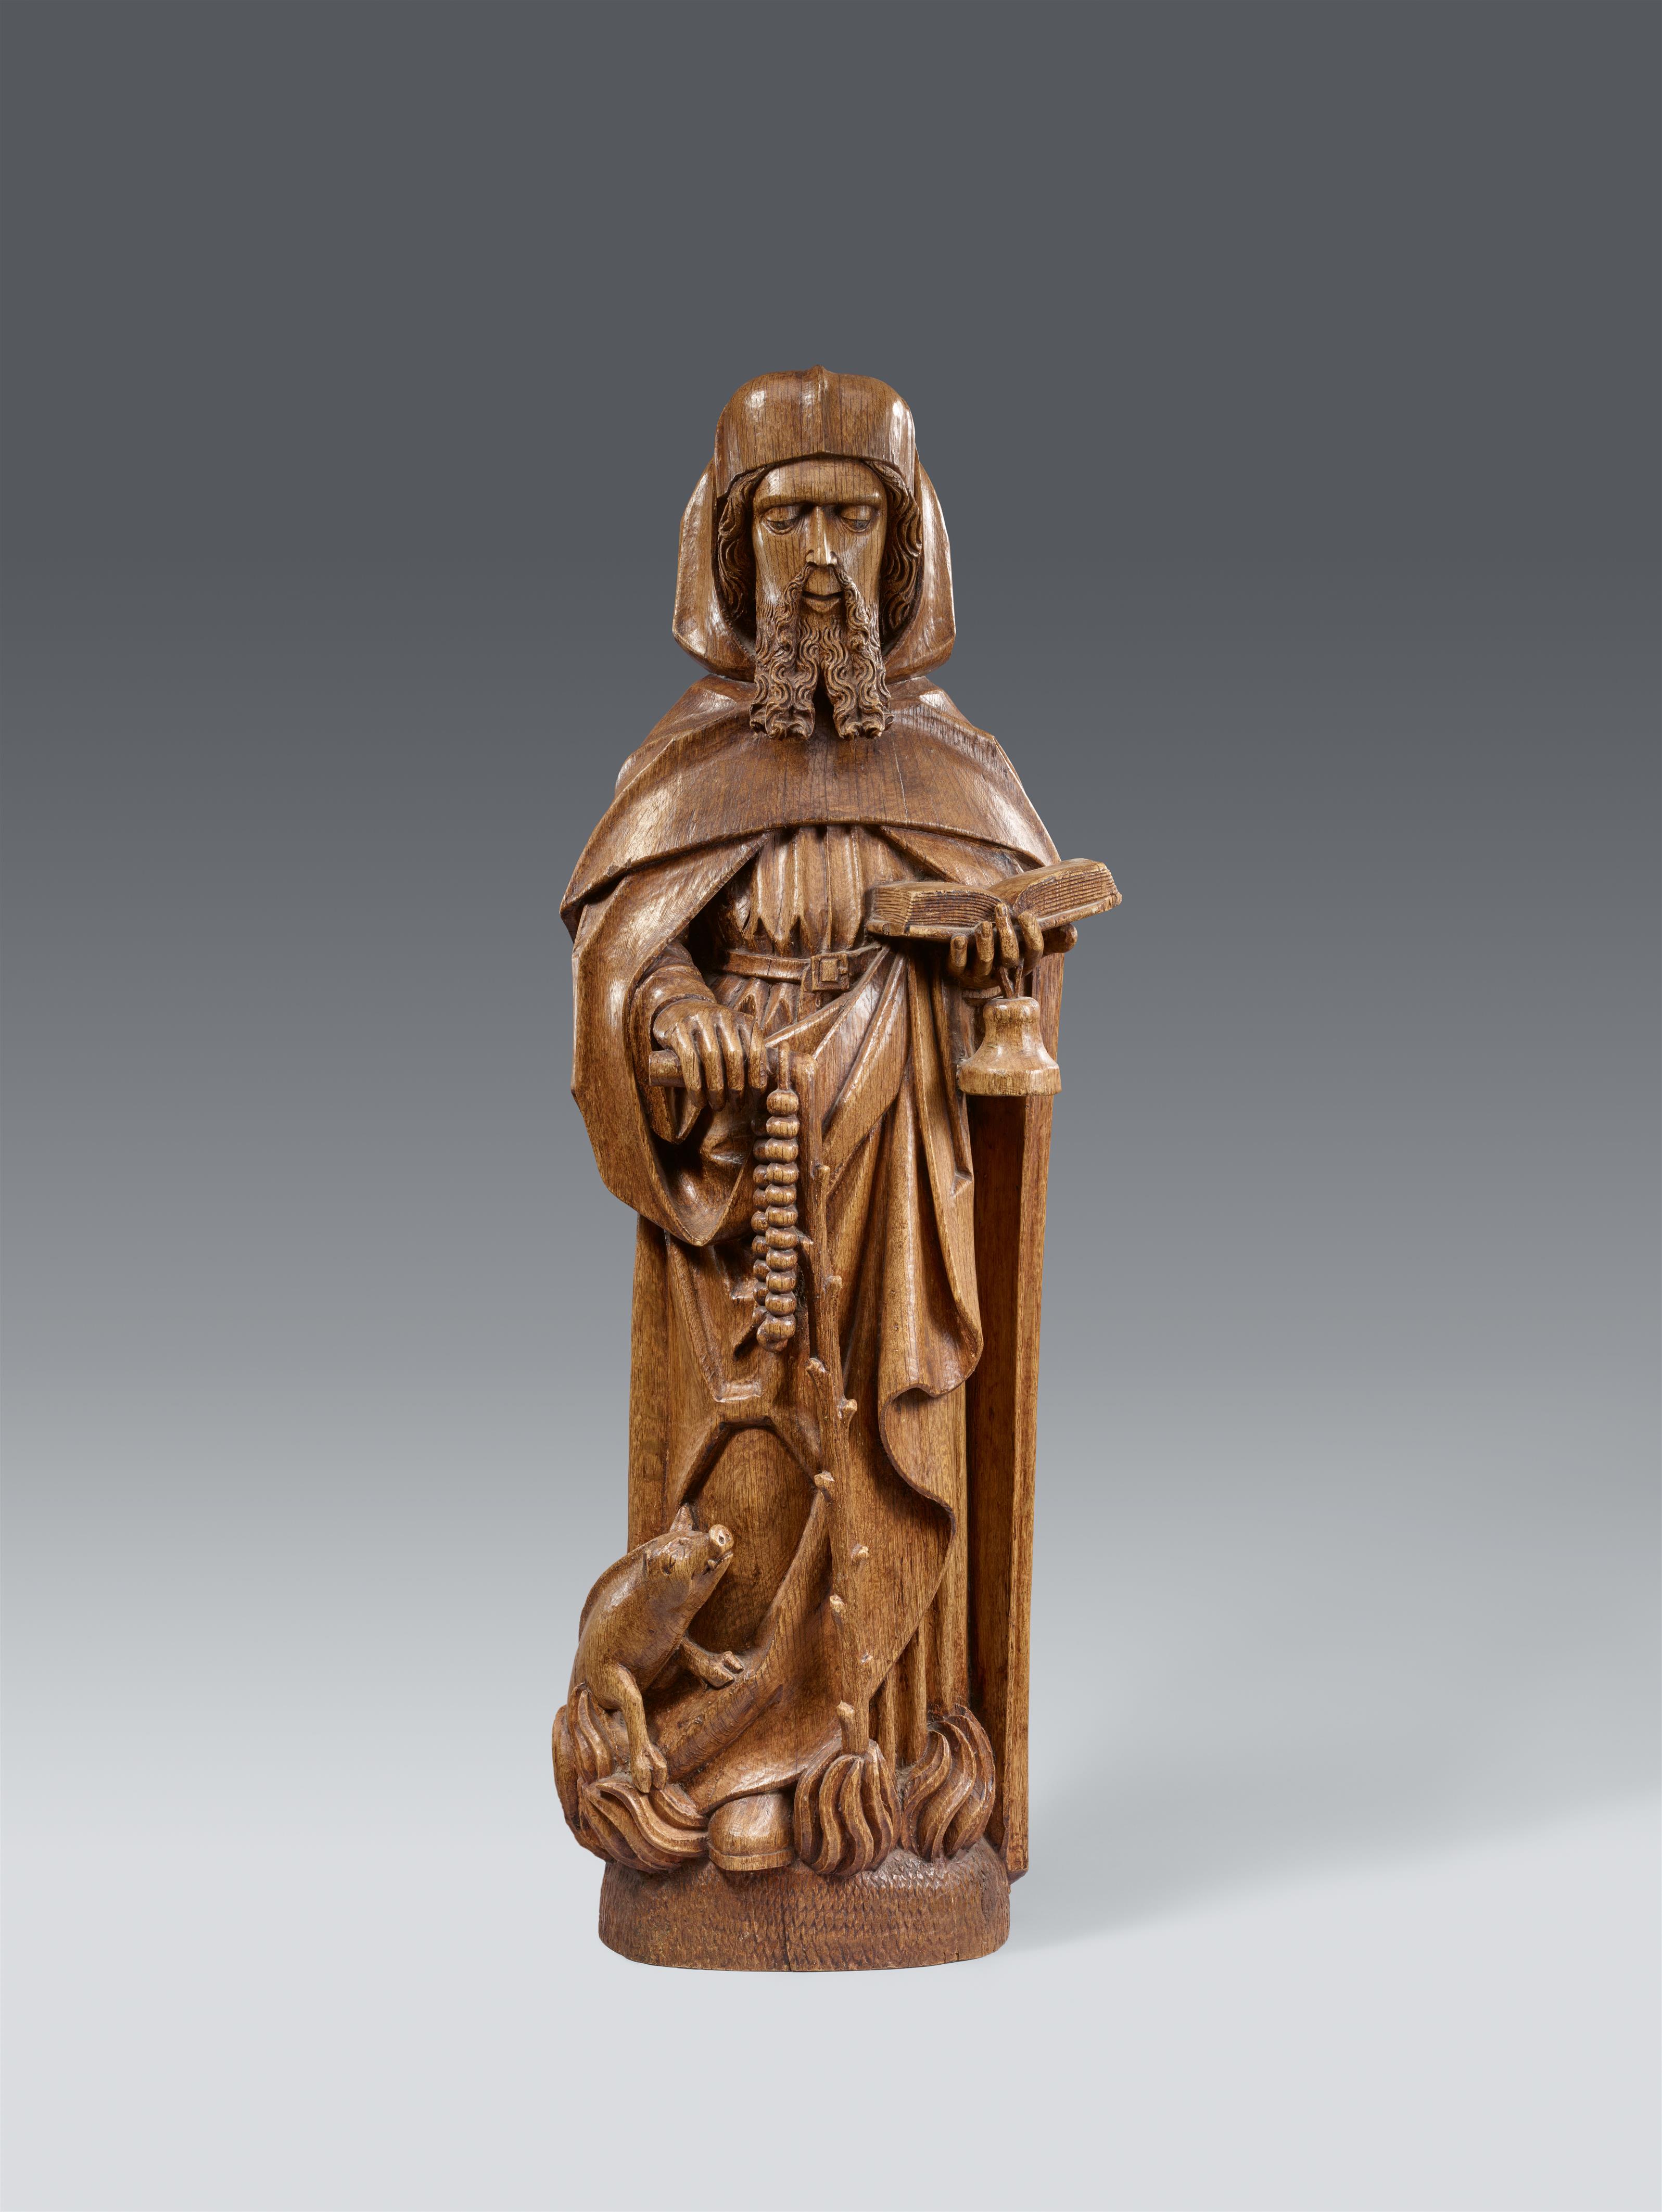 Maasland 1st quarter 16th century - A Maasland carved wood figure of St Anthony, first quarter 16th century - image-1